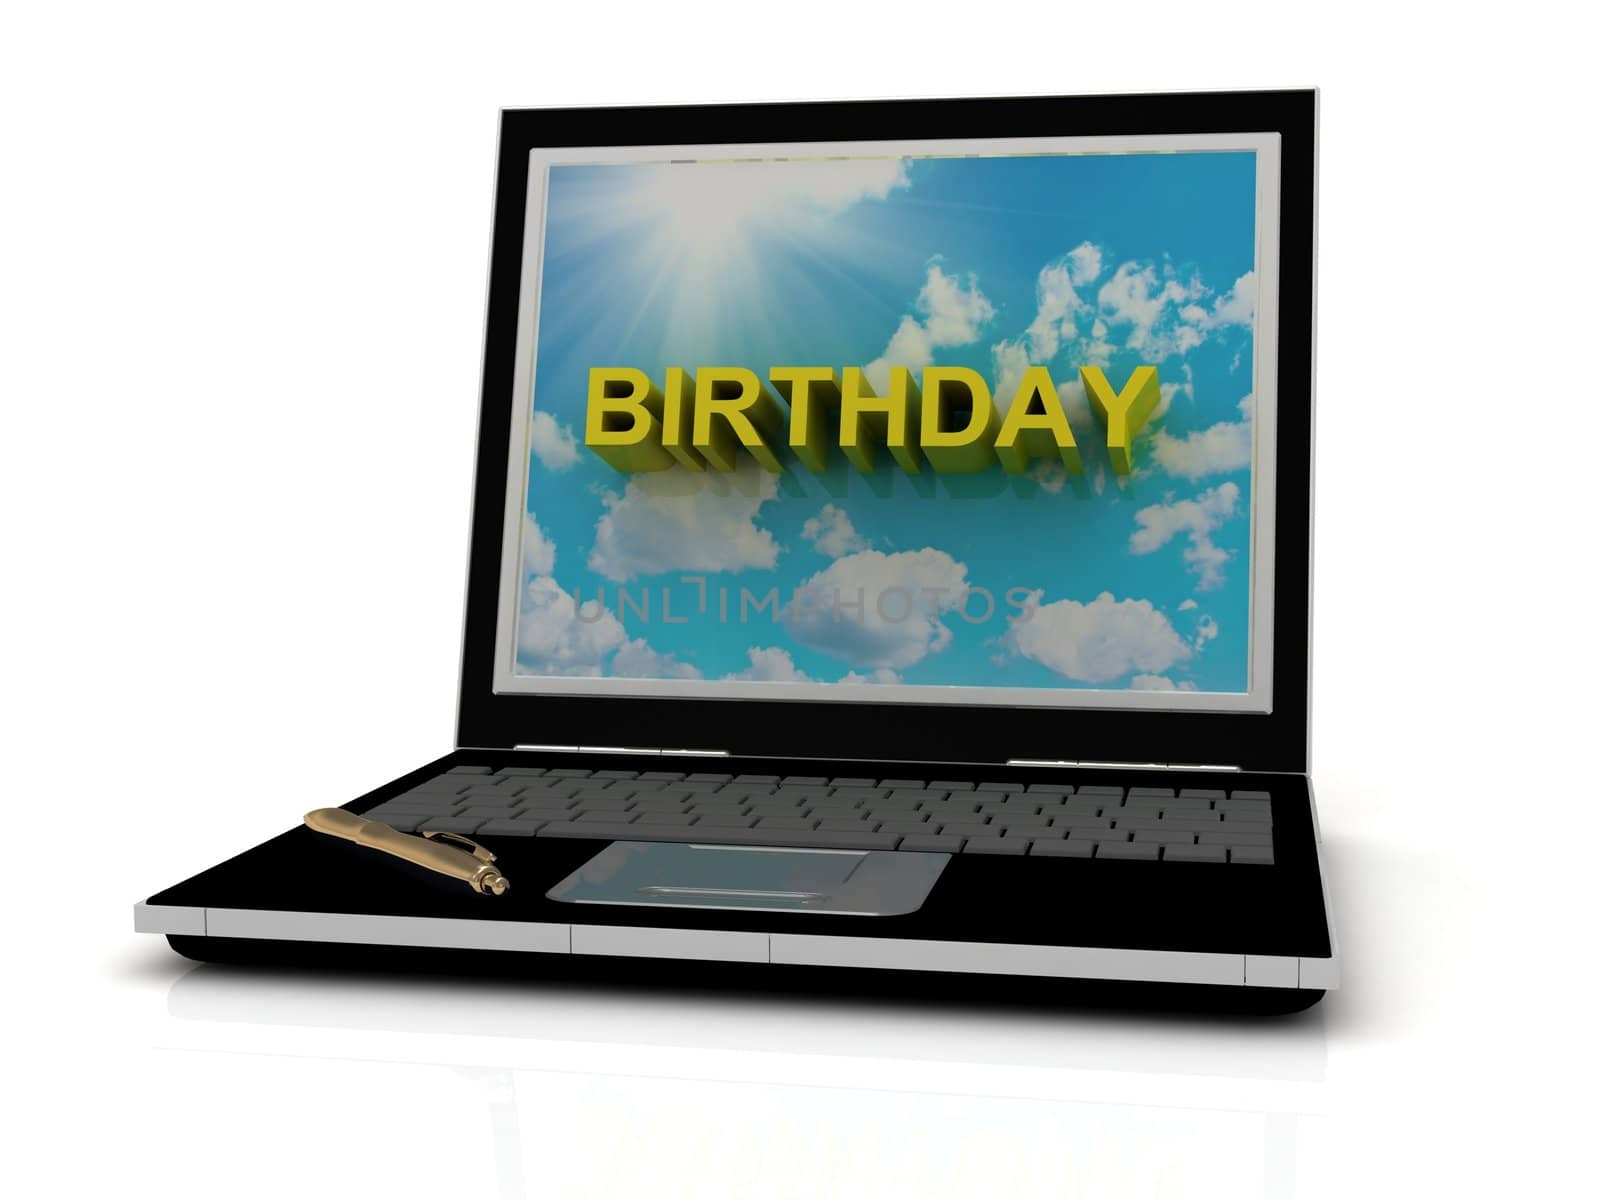 BIRTHDAY sign on laptop screen of the yellow letters on a background of sky, sun and clouds